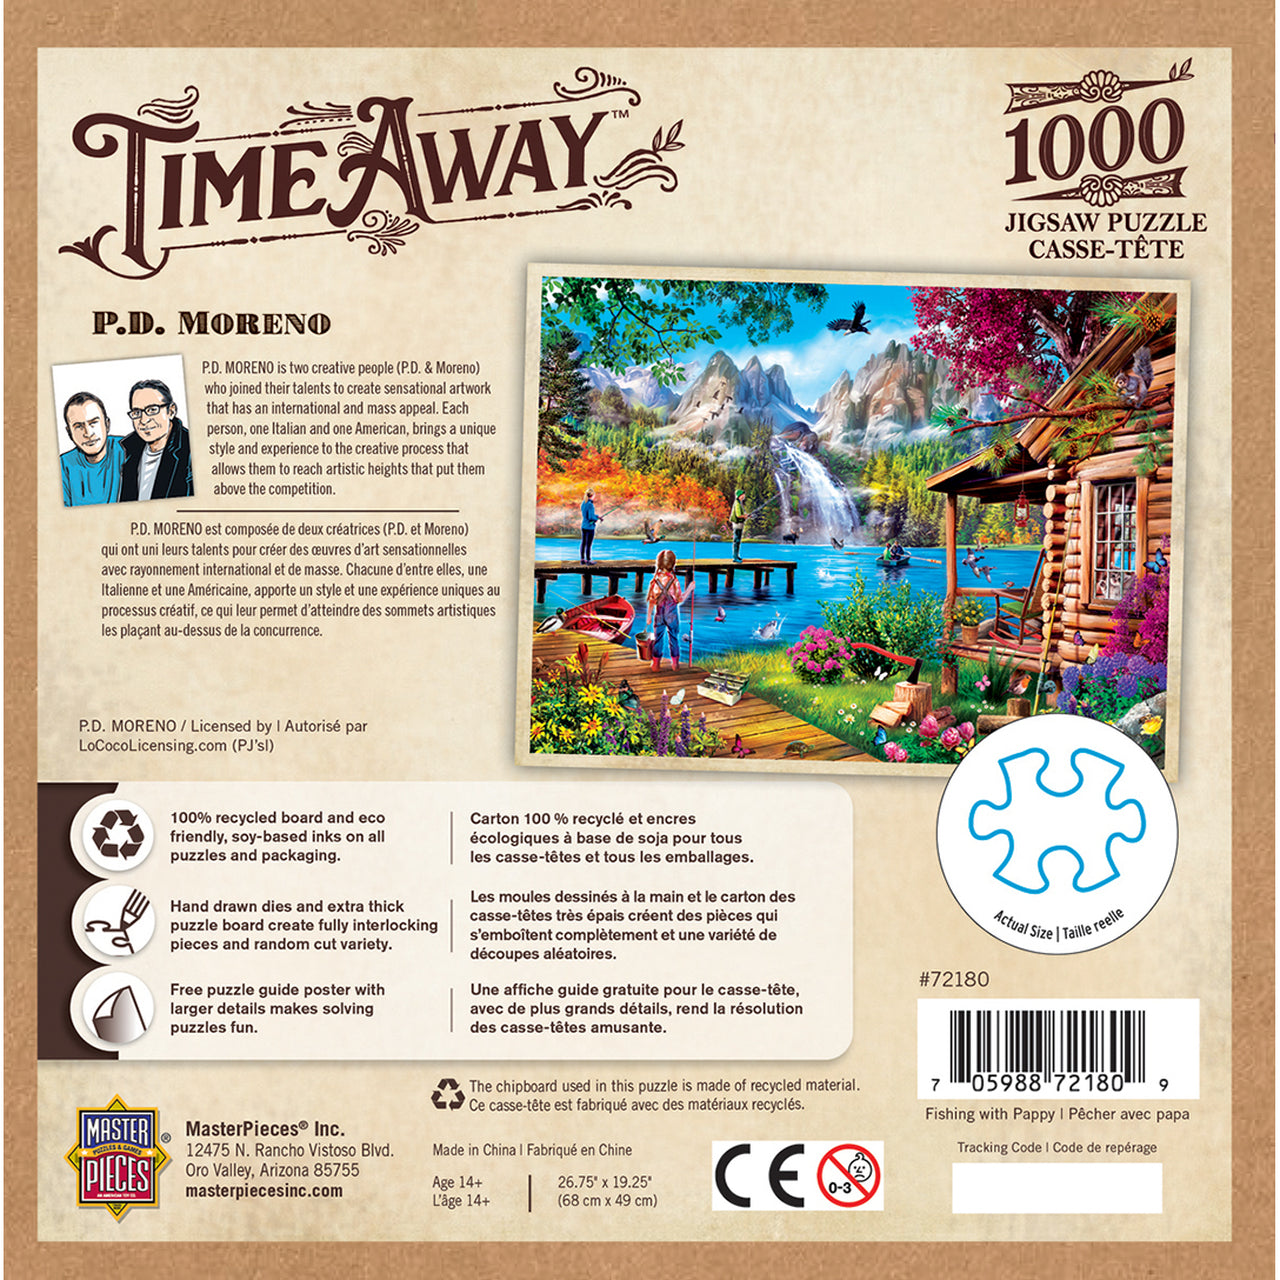 Time Away - Fishing with Pappy 1000 Piece Jigsaw Puzzle by Masterpieces